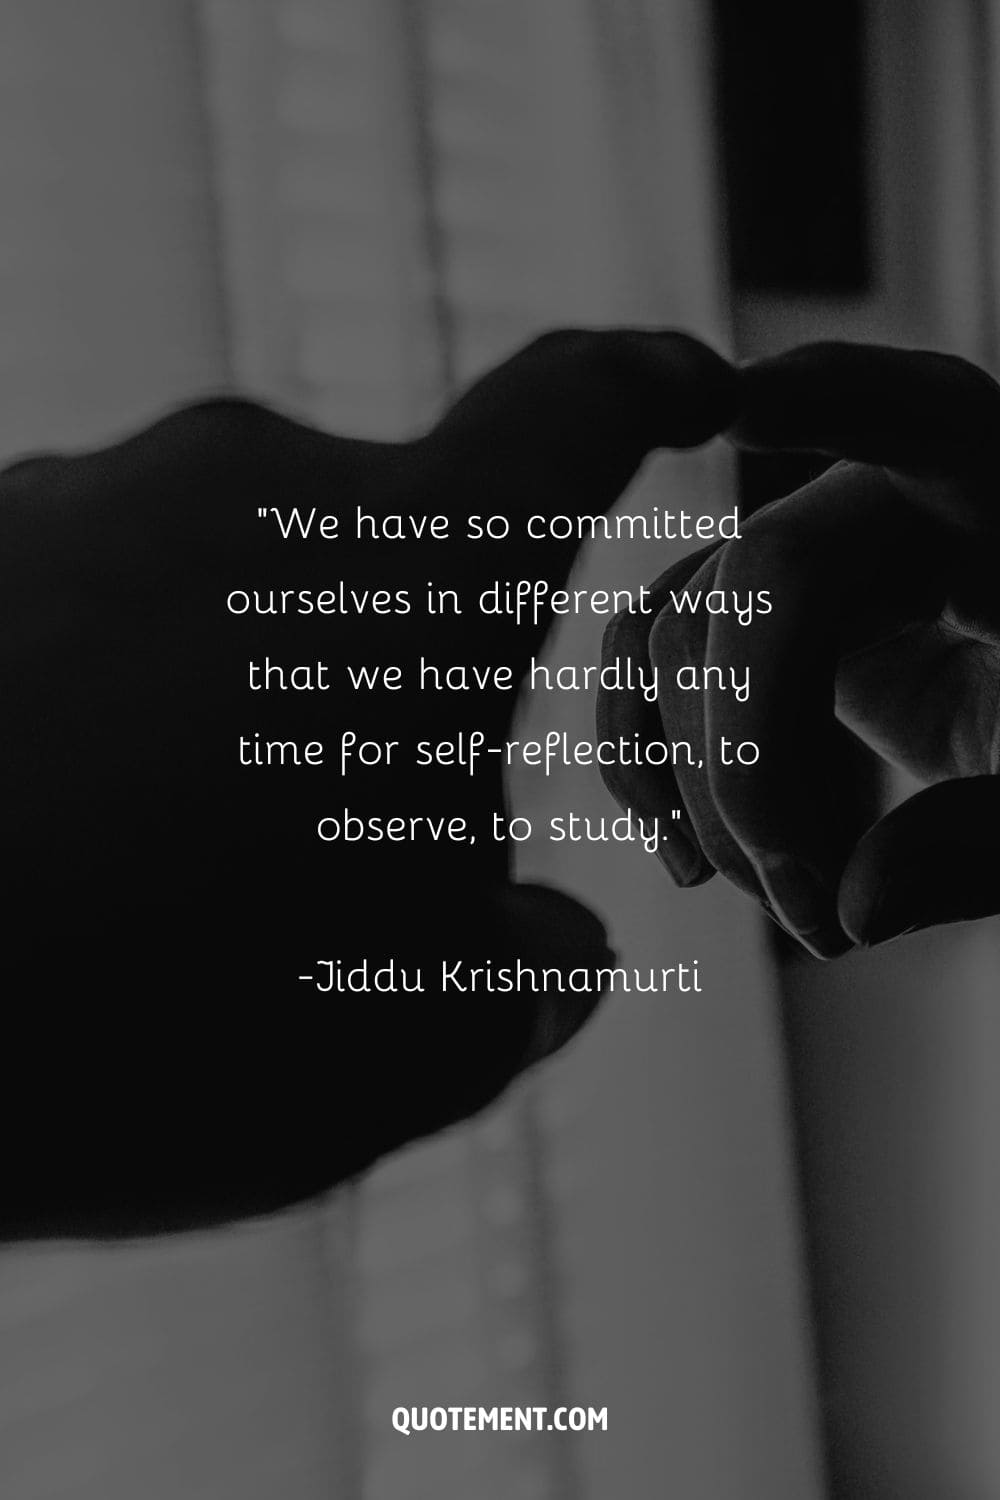 We have so committed ourselves in different ways that we have hardly any time for self-reflection, to observe, to study. – Jiddu Krishnamurti